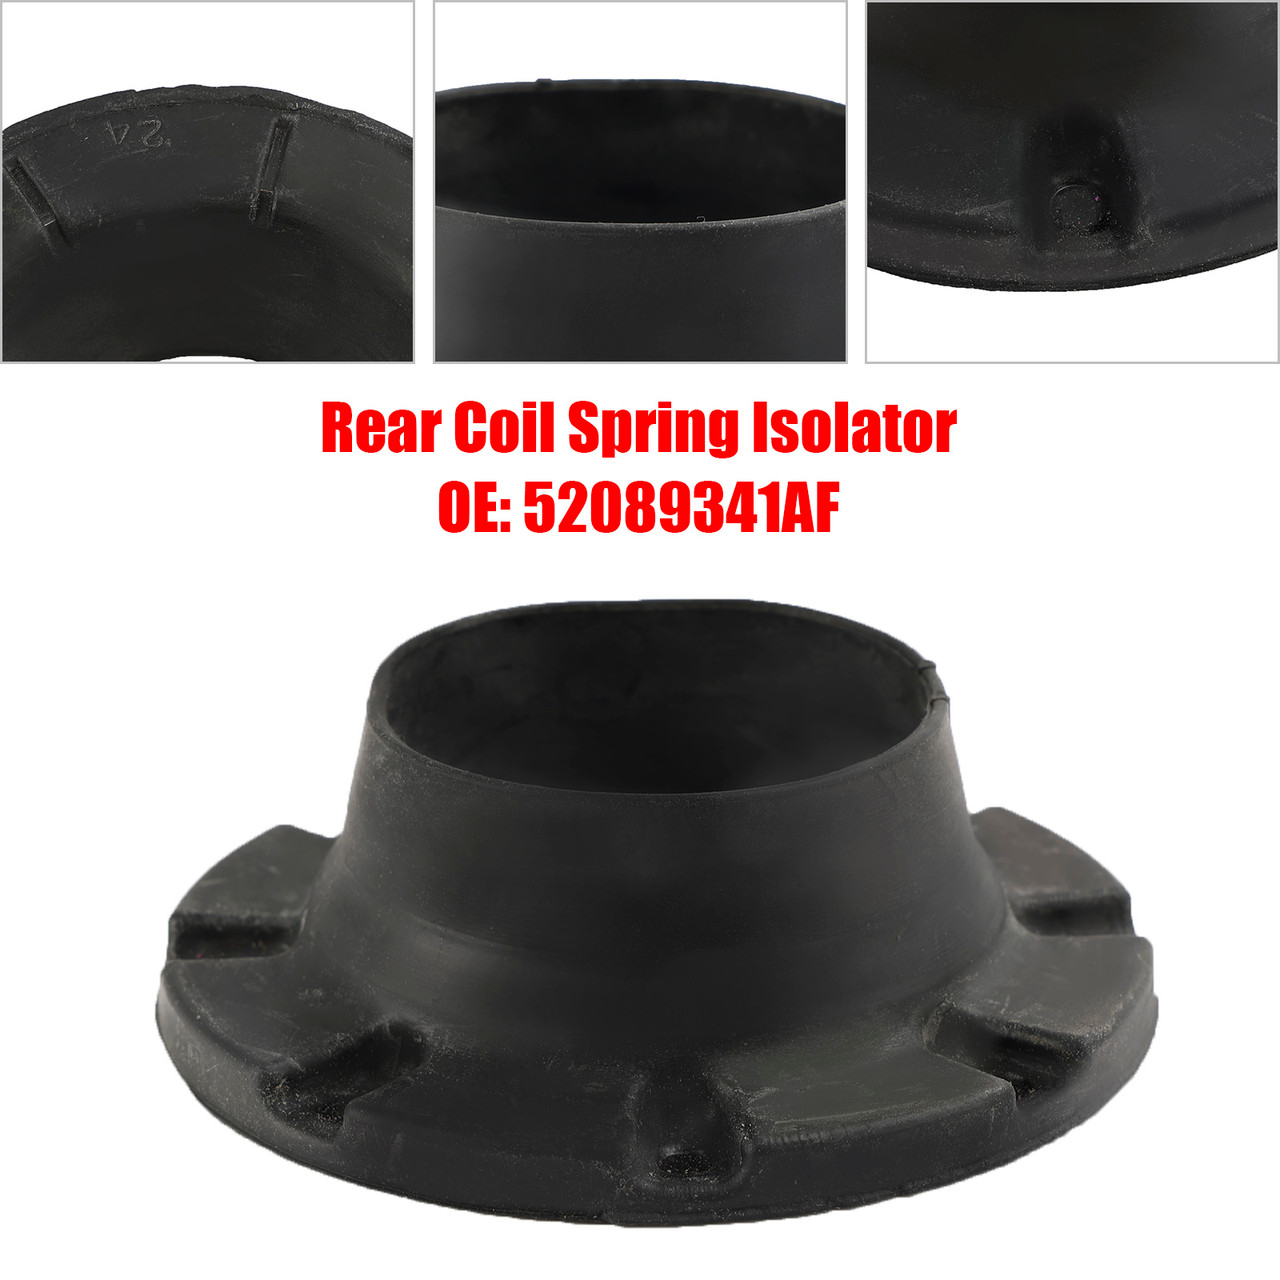 Rear Coil Spring Isolator 52089341AF for Jeep Grand Cherokee WK 2005-2010